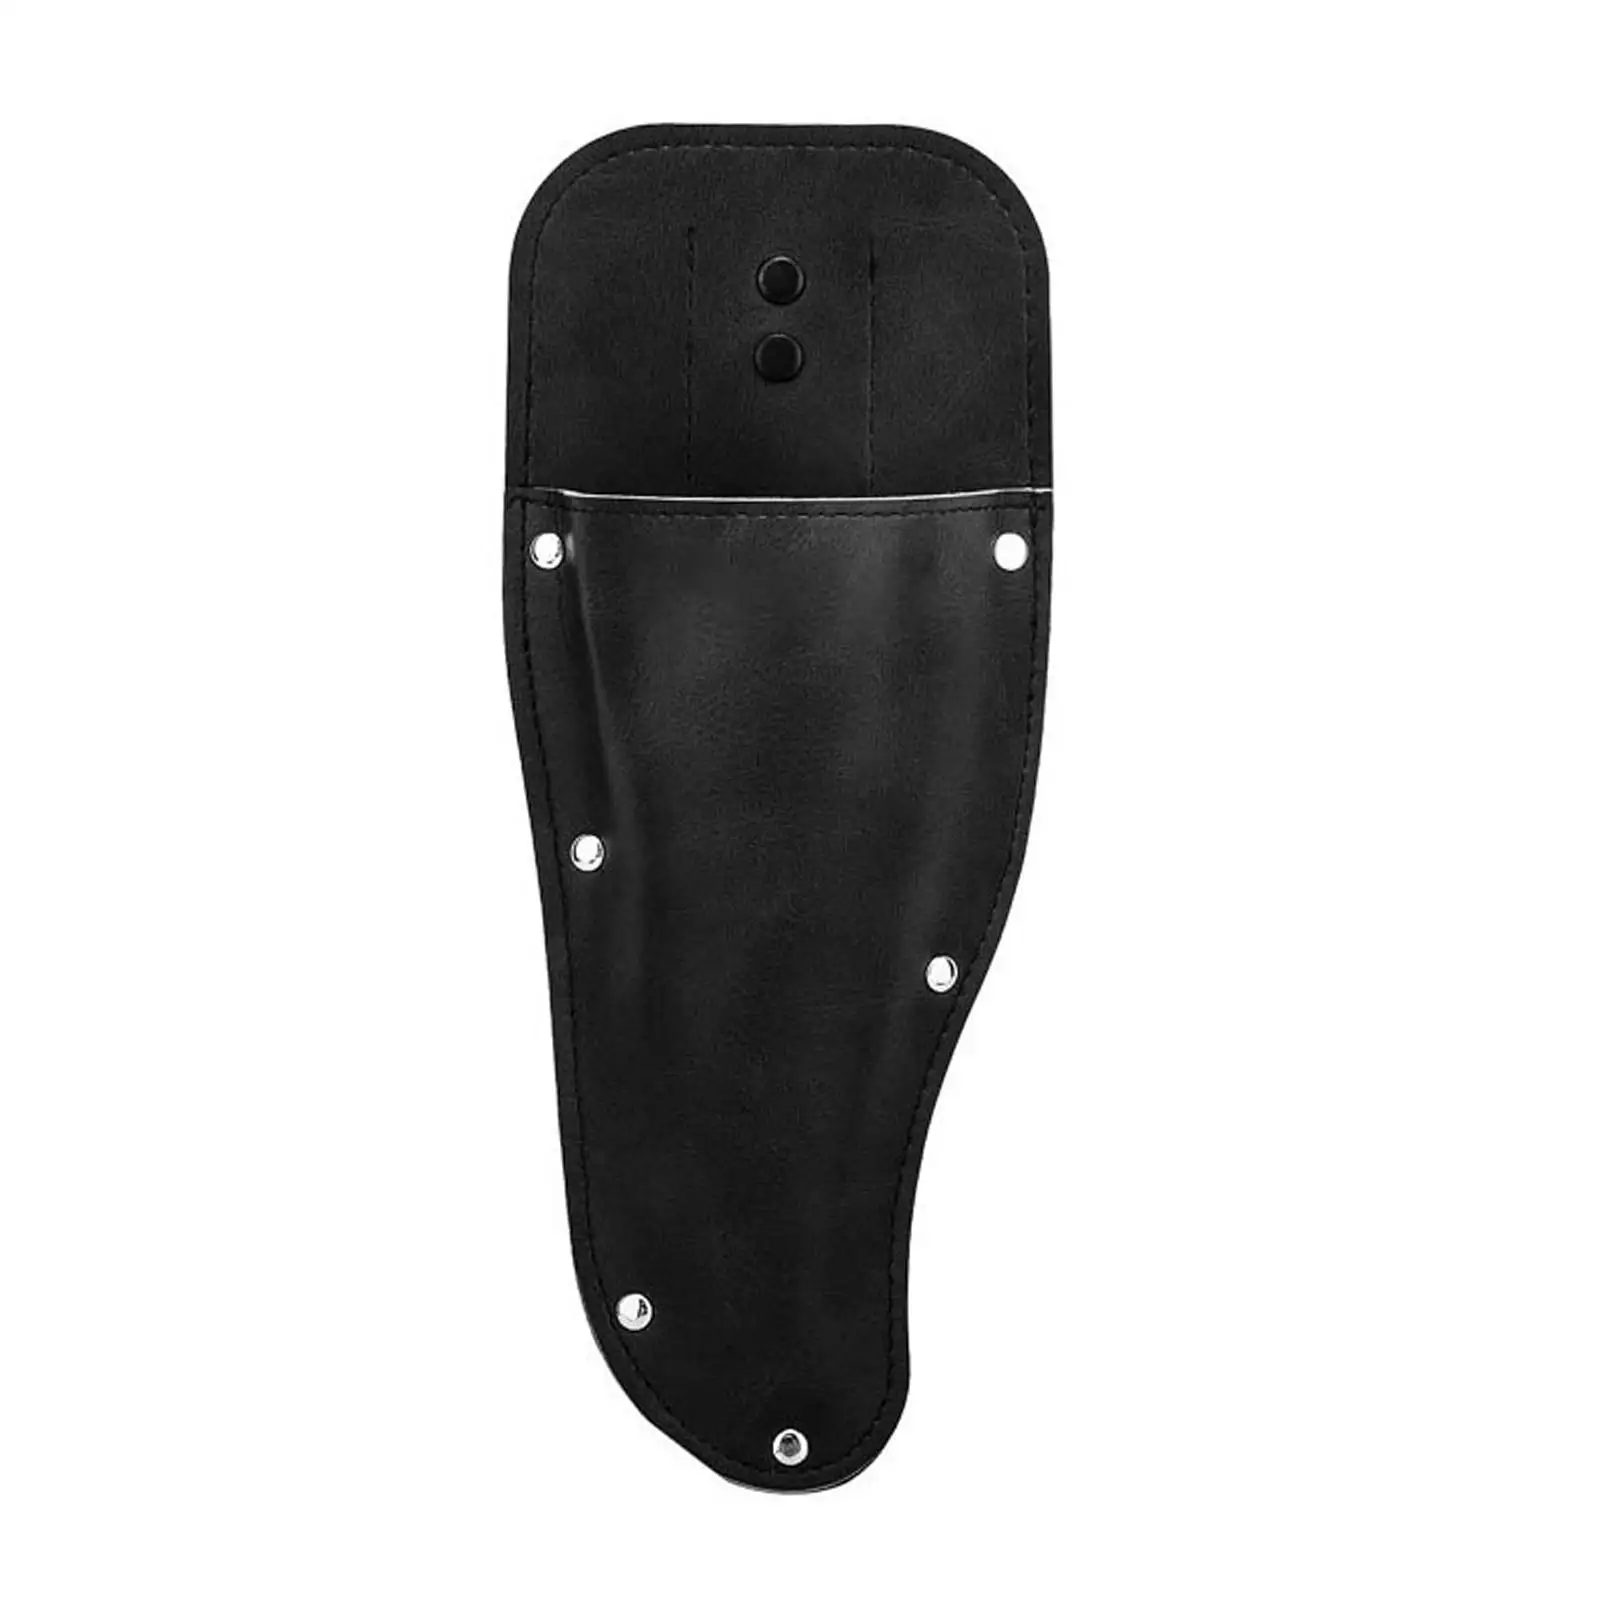 Sheath Pouch Holder Scabbard Cover,Tool Pouch Protective Case for Gardening